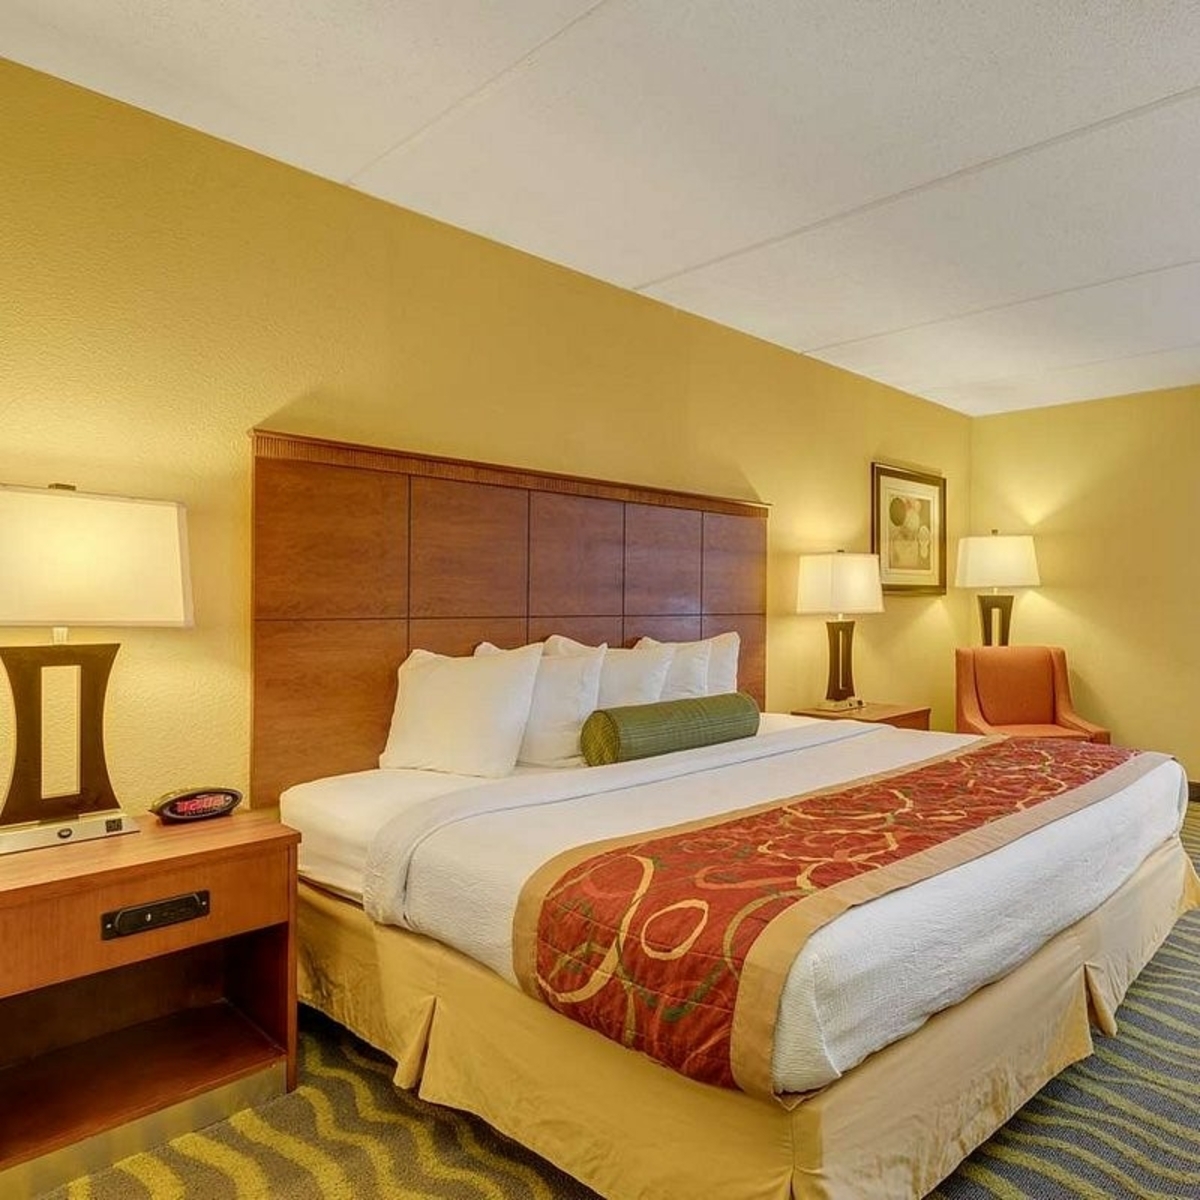 If you're coming to #Charlotte to see Queen B, you might as well stay in a room fit for a queen! 👑 You can be Queen for a Day in our spacious, well-appointed rooms. Relax on our comfy beds with #crisplinens and #softpillows. Book your weekend trip here: bit.ly/3r2VIdj